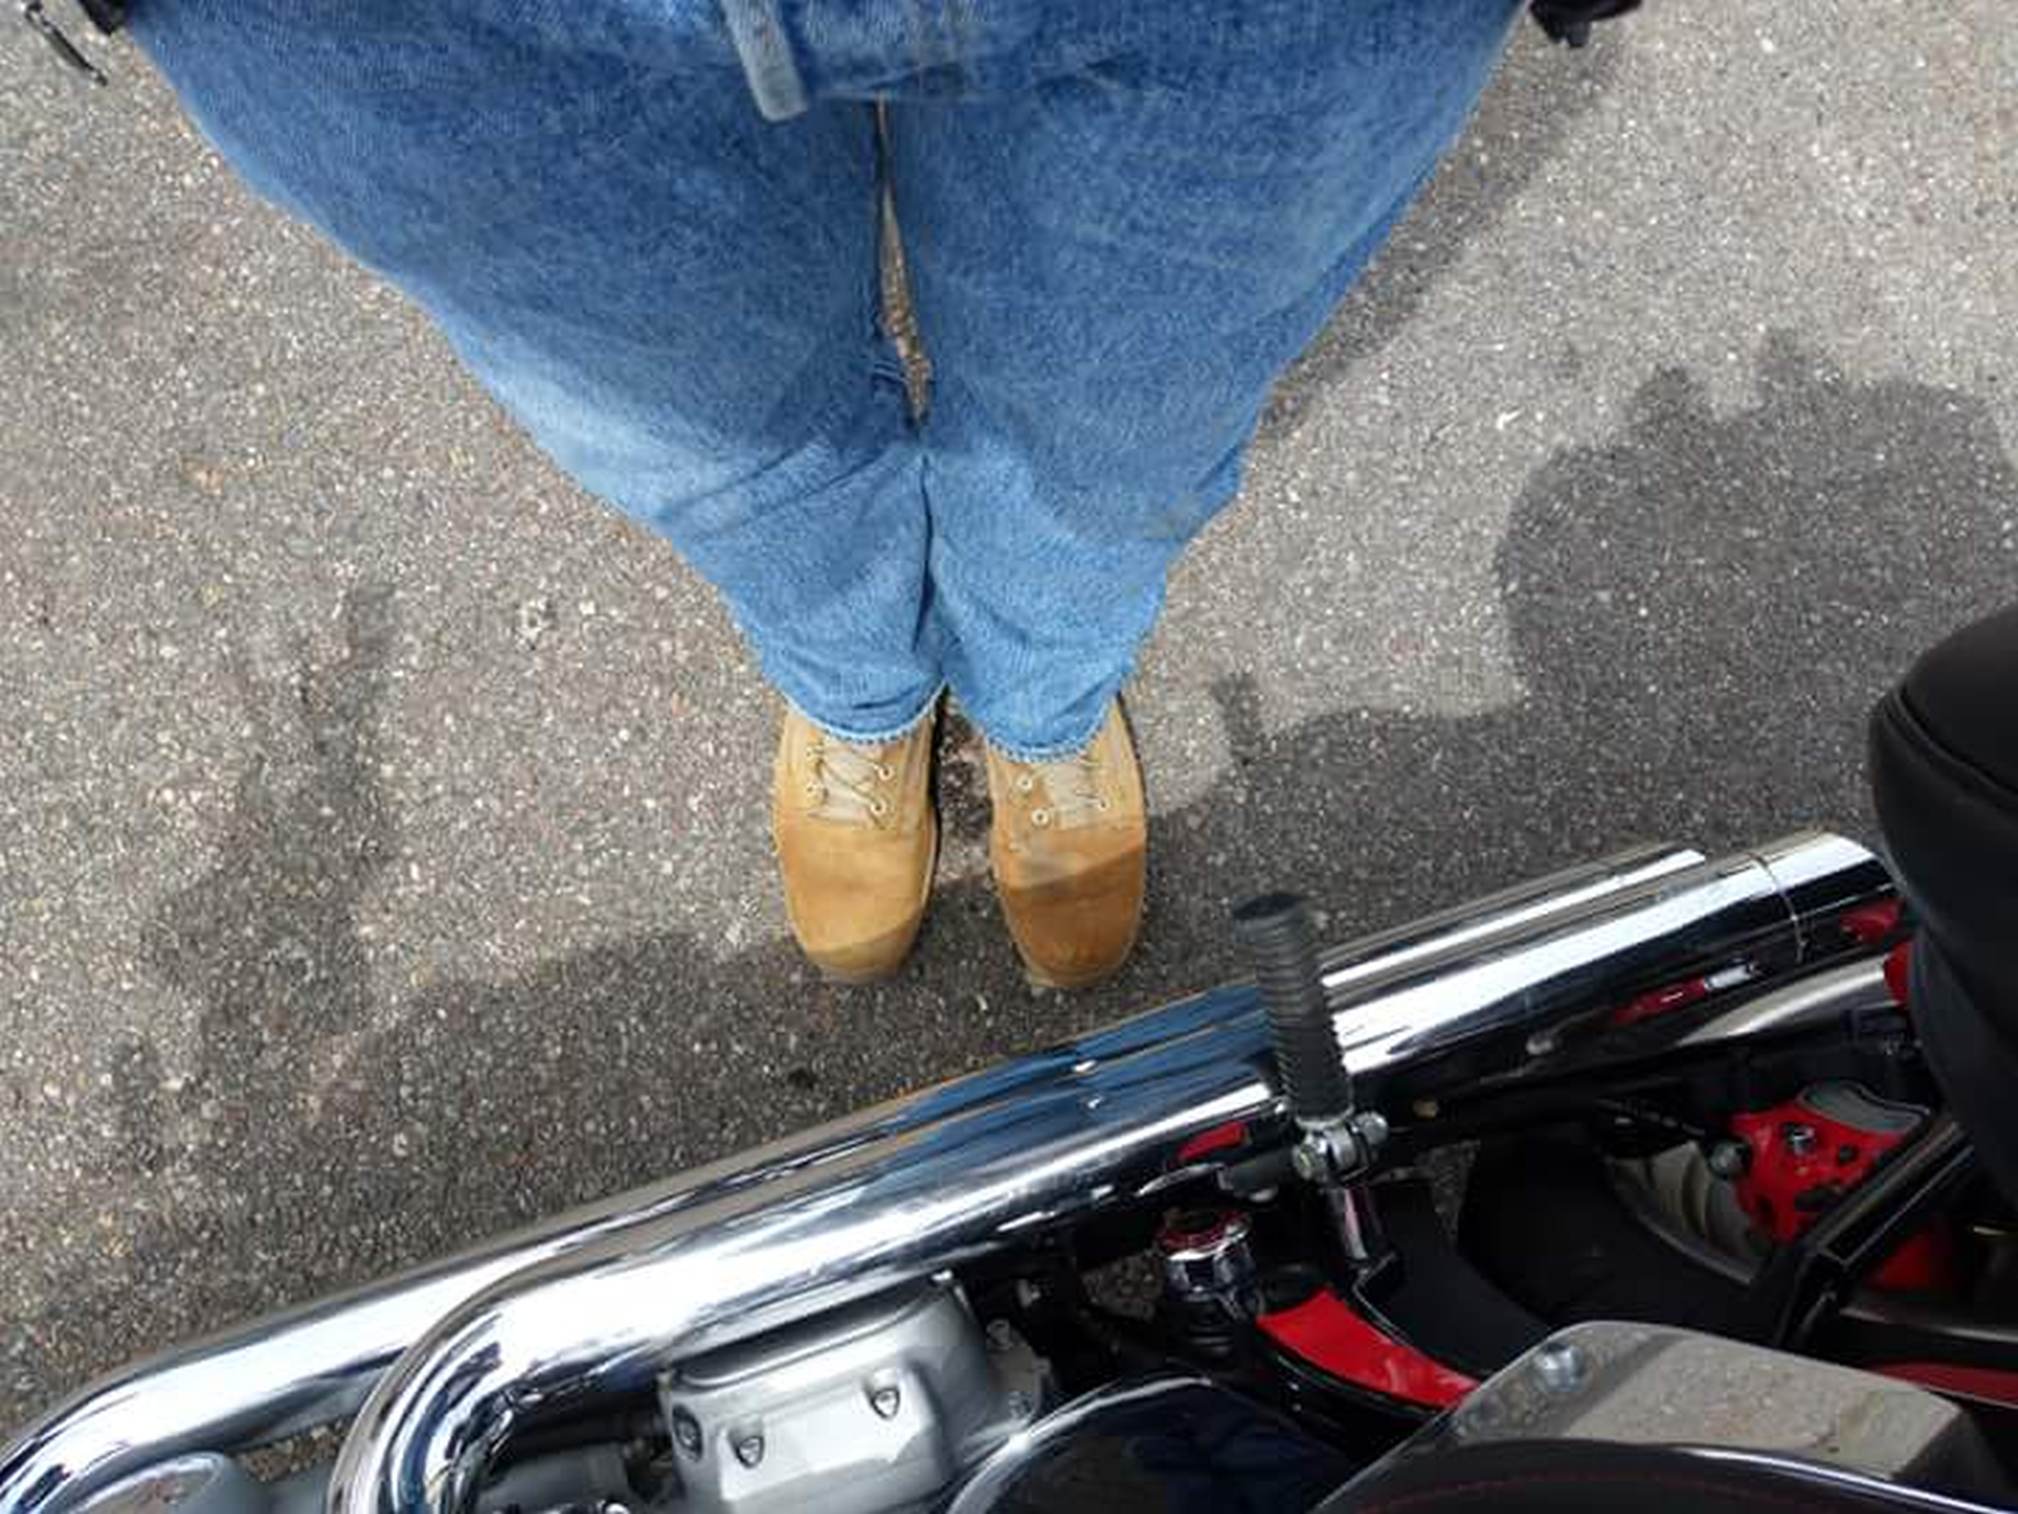 Top-down view of a man wearing rugged tan hiking boots with thick laces, next to a motorcycle.